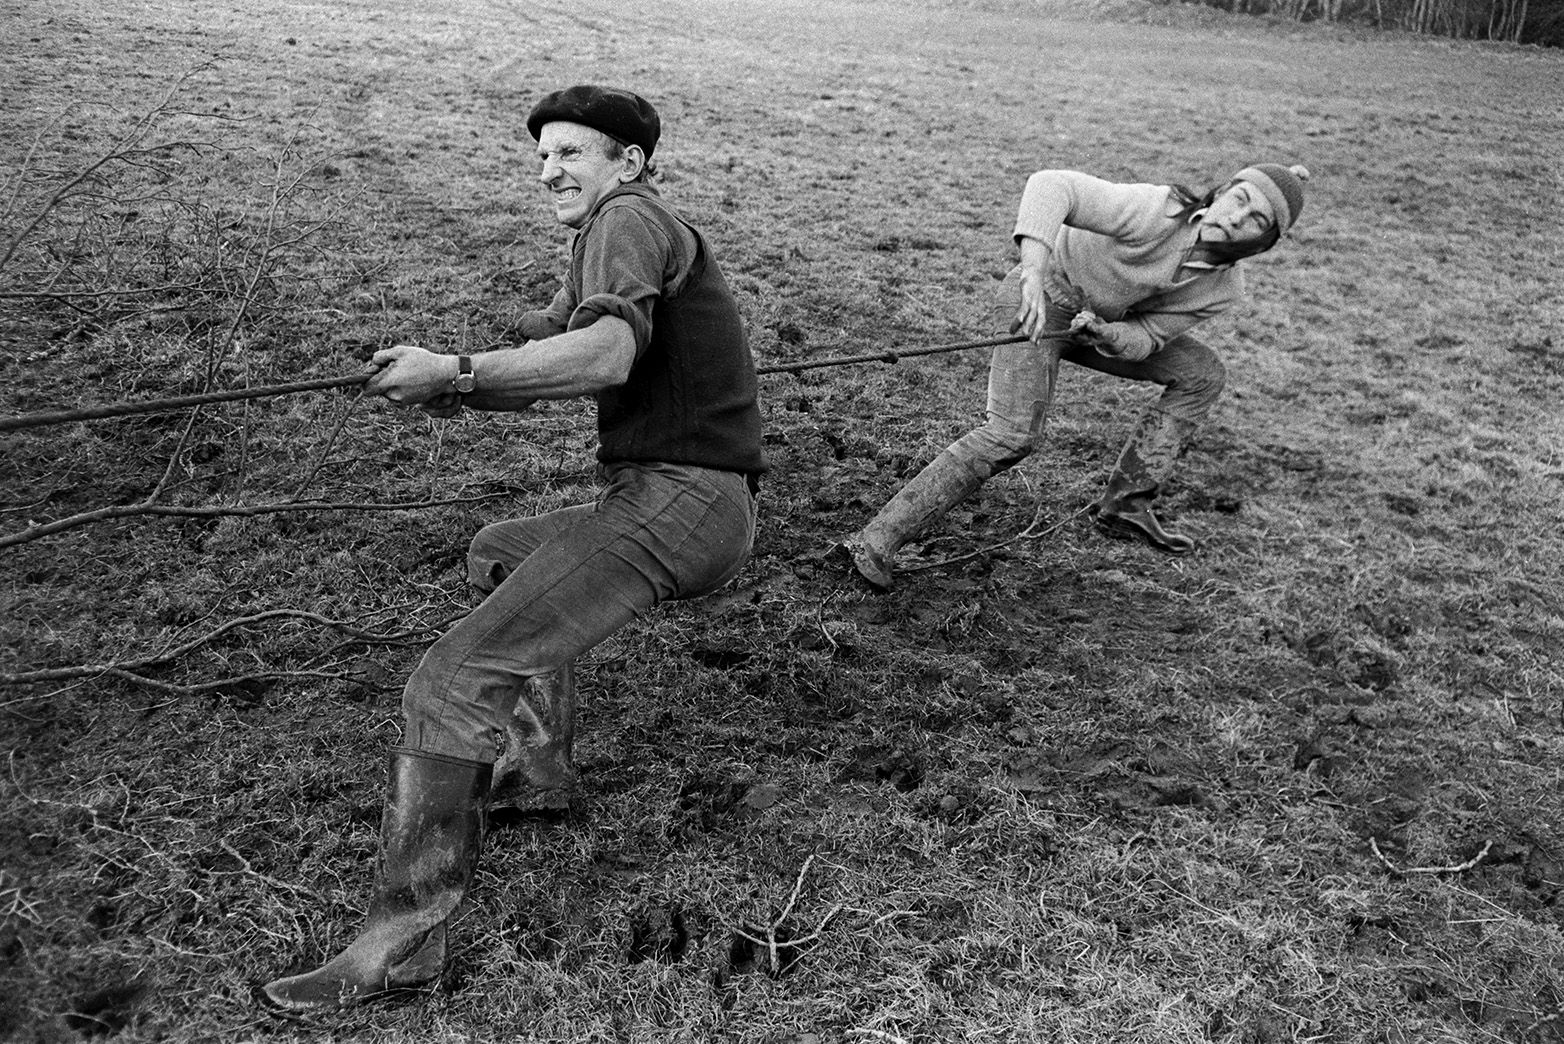 Ivor Bourne and Derek Bright pulling a rope attached to a tree they are felling by the flooded River Torridge, in a field at Mill Road Farm, Beaford. The farm was also known as Jeffrys.